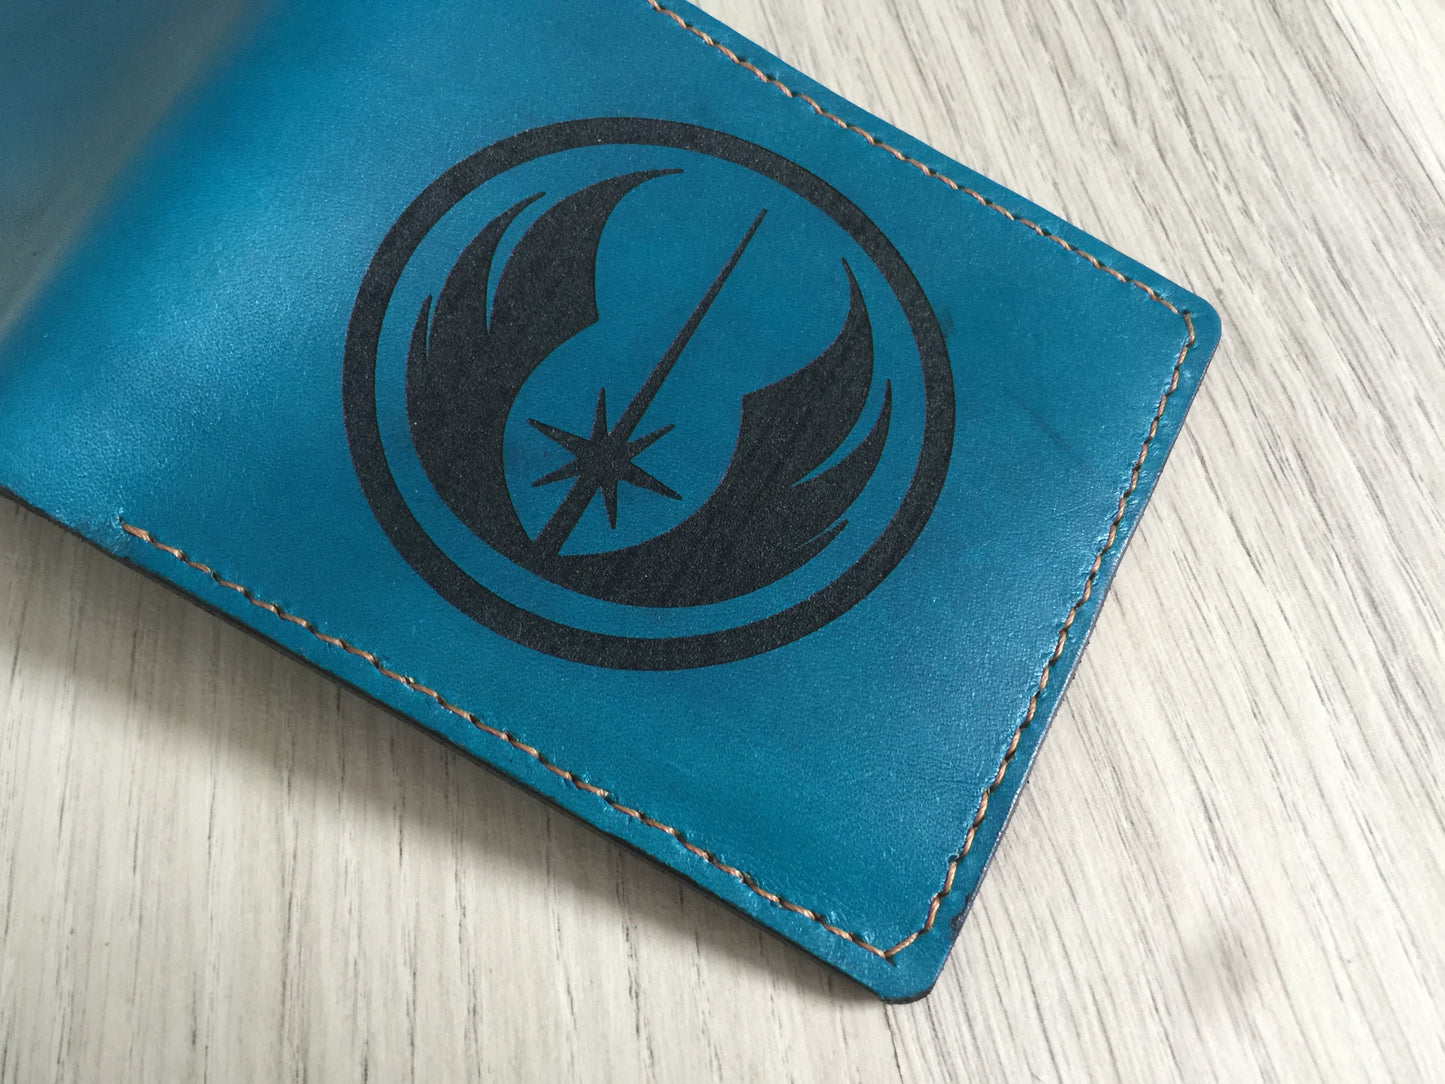 Mayan Corner - Starwars Jedi logo customized leather handmade men's wallet, unique present for men, anniversary gifts for husband, boyfriend, father, brother, small leather wallet for him